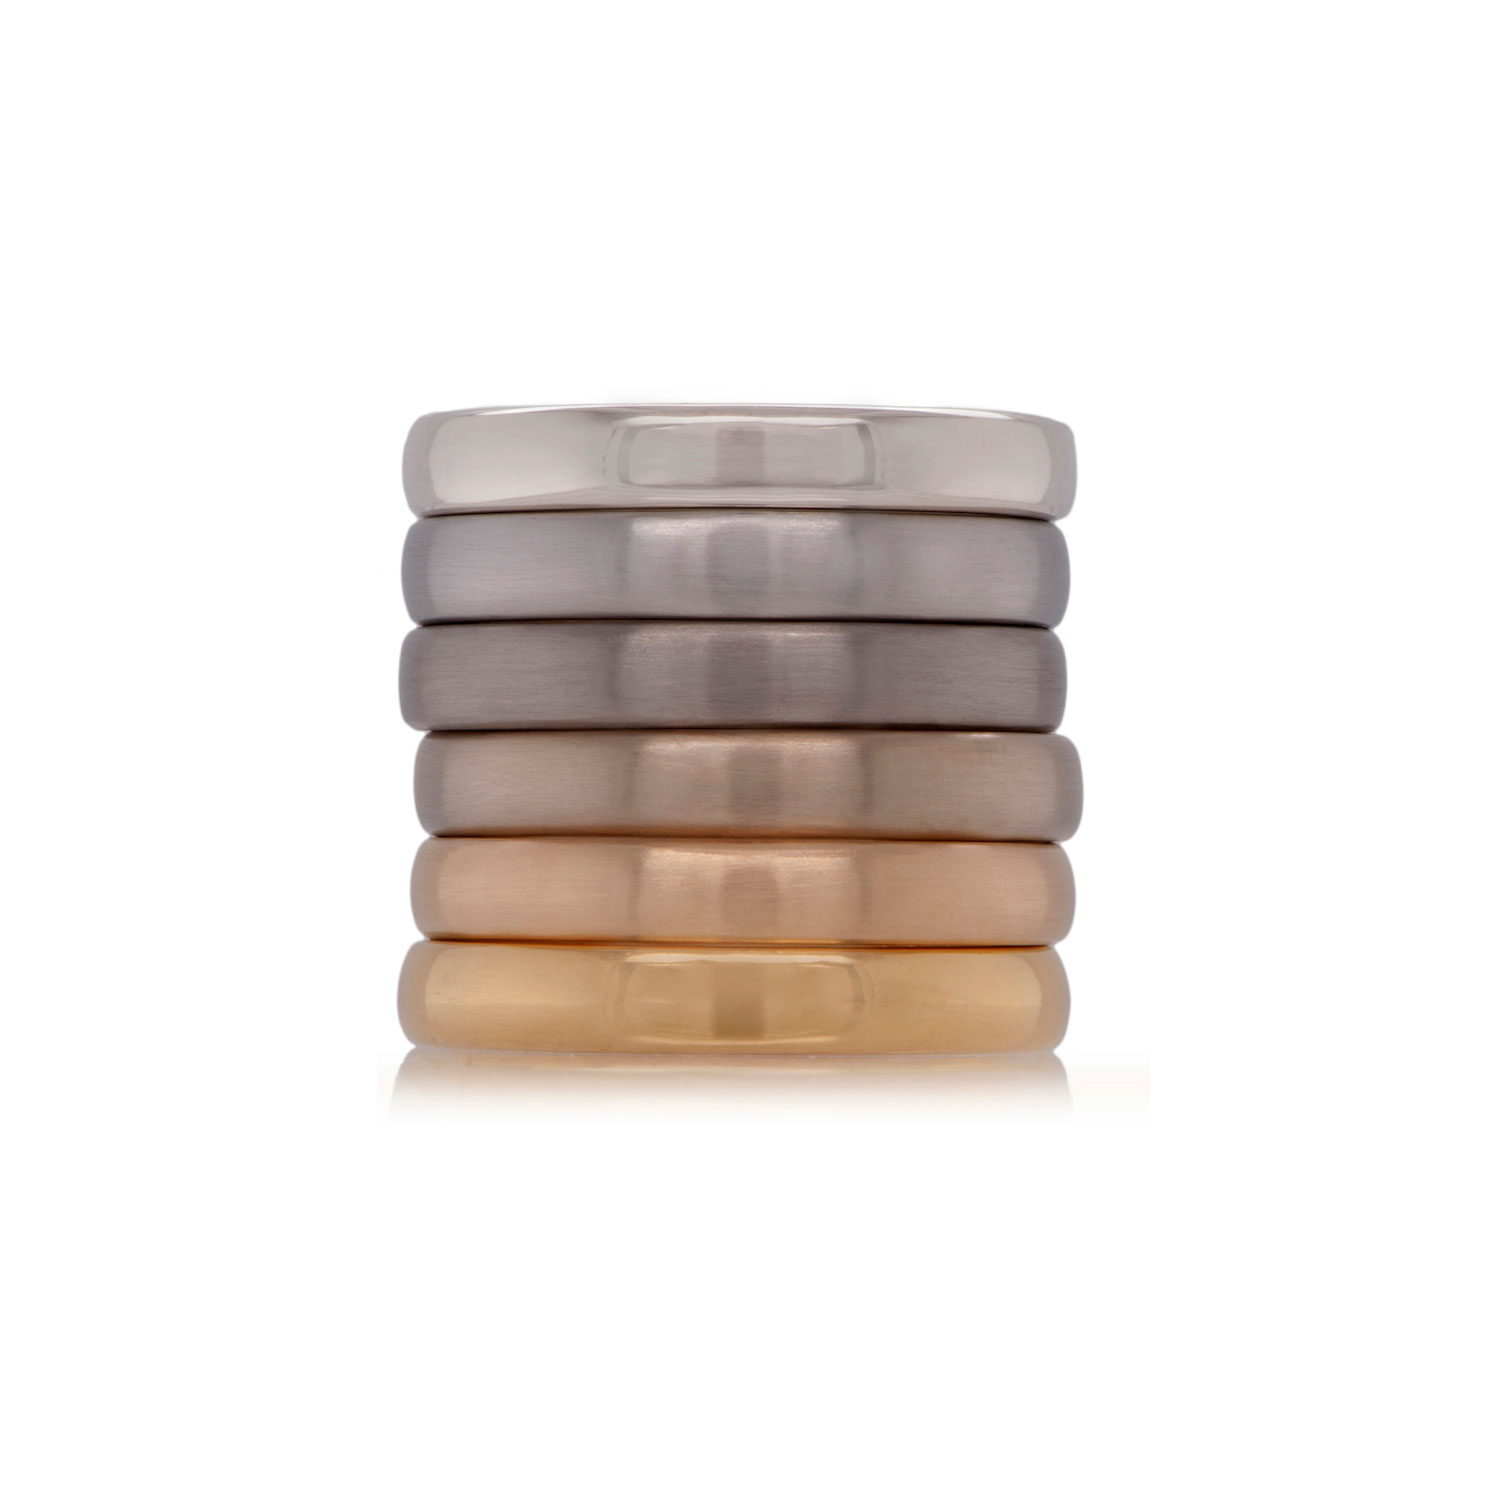 six ethical wedding rings in different tones of gold in a single stack on white background